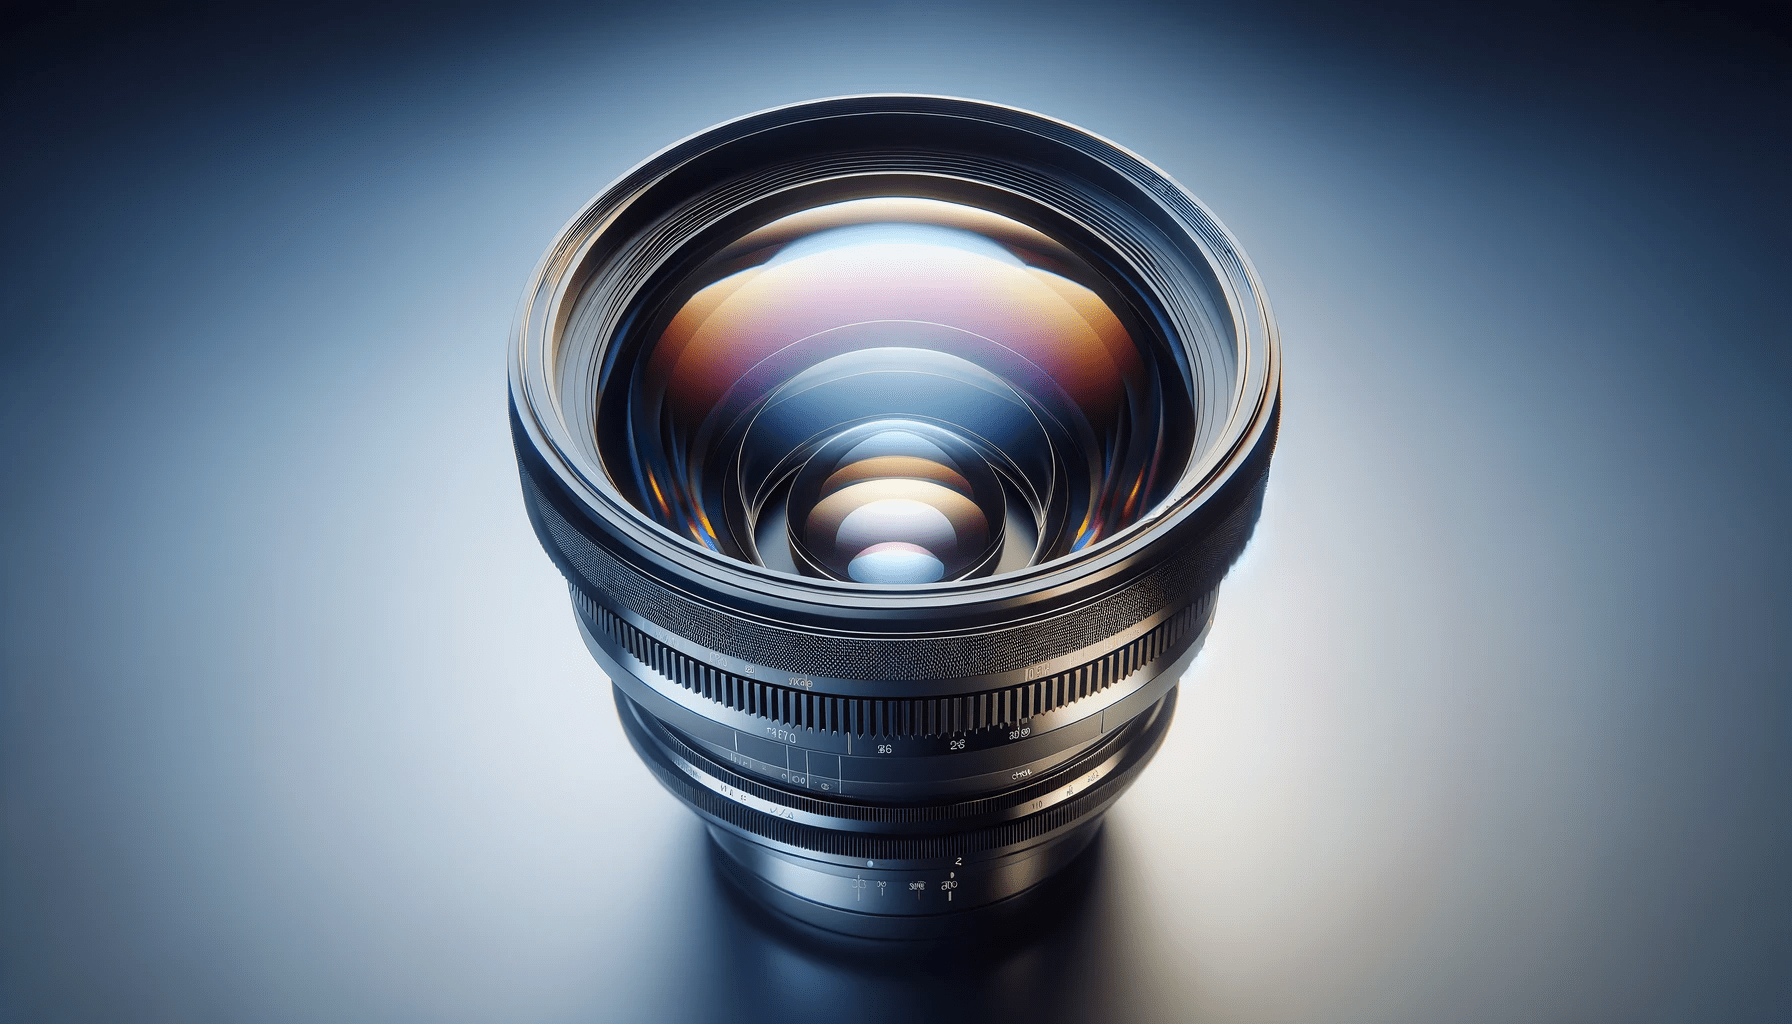 Large vs small objective lenses